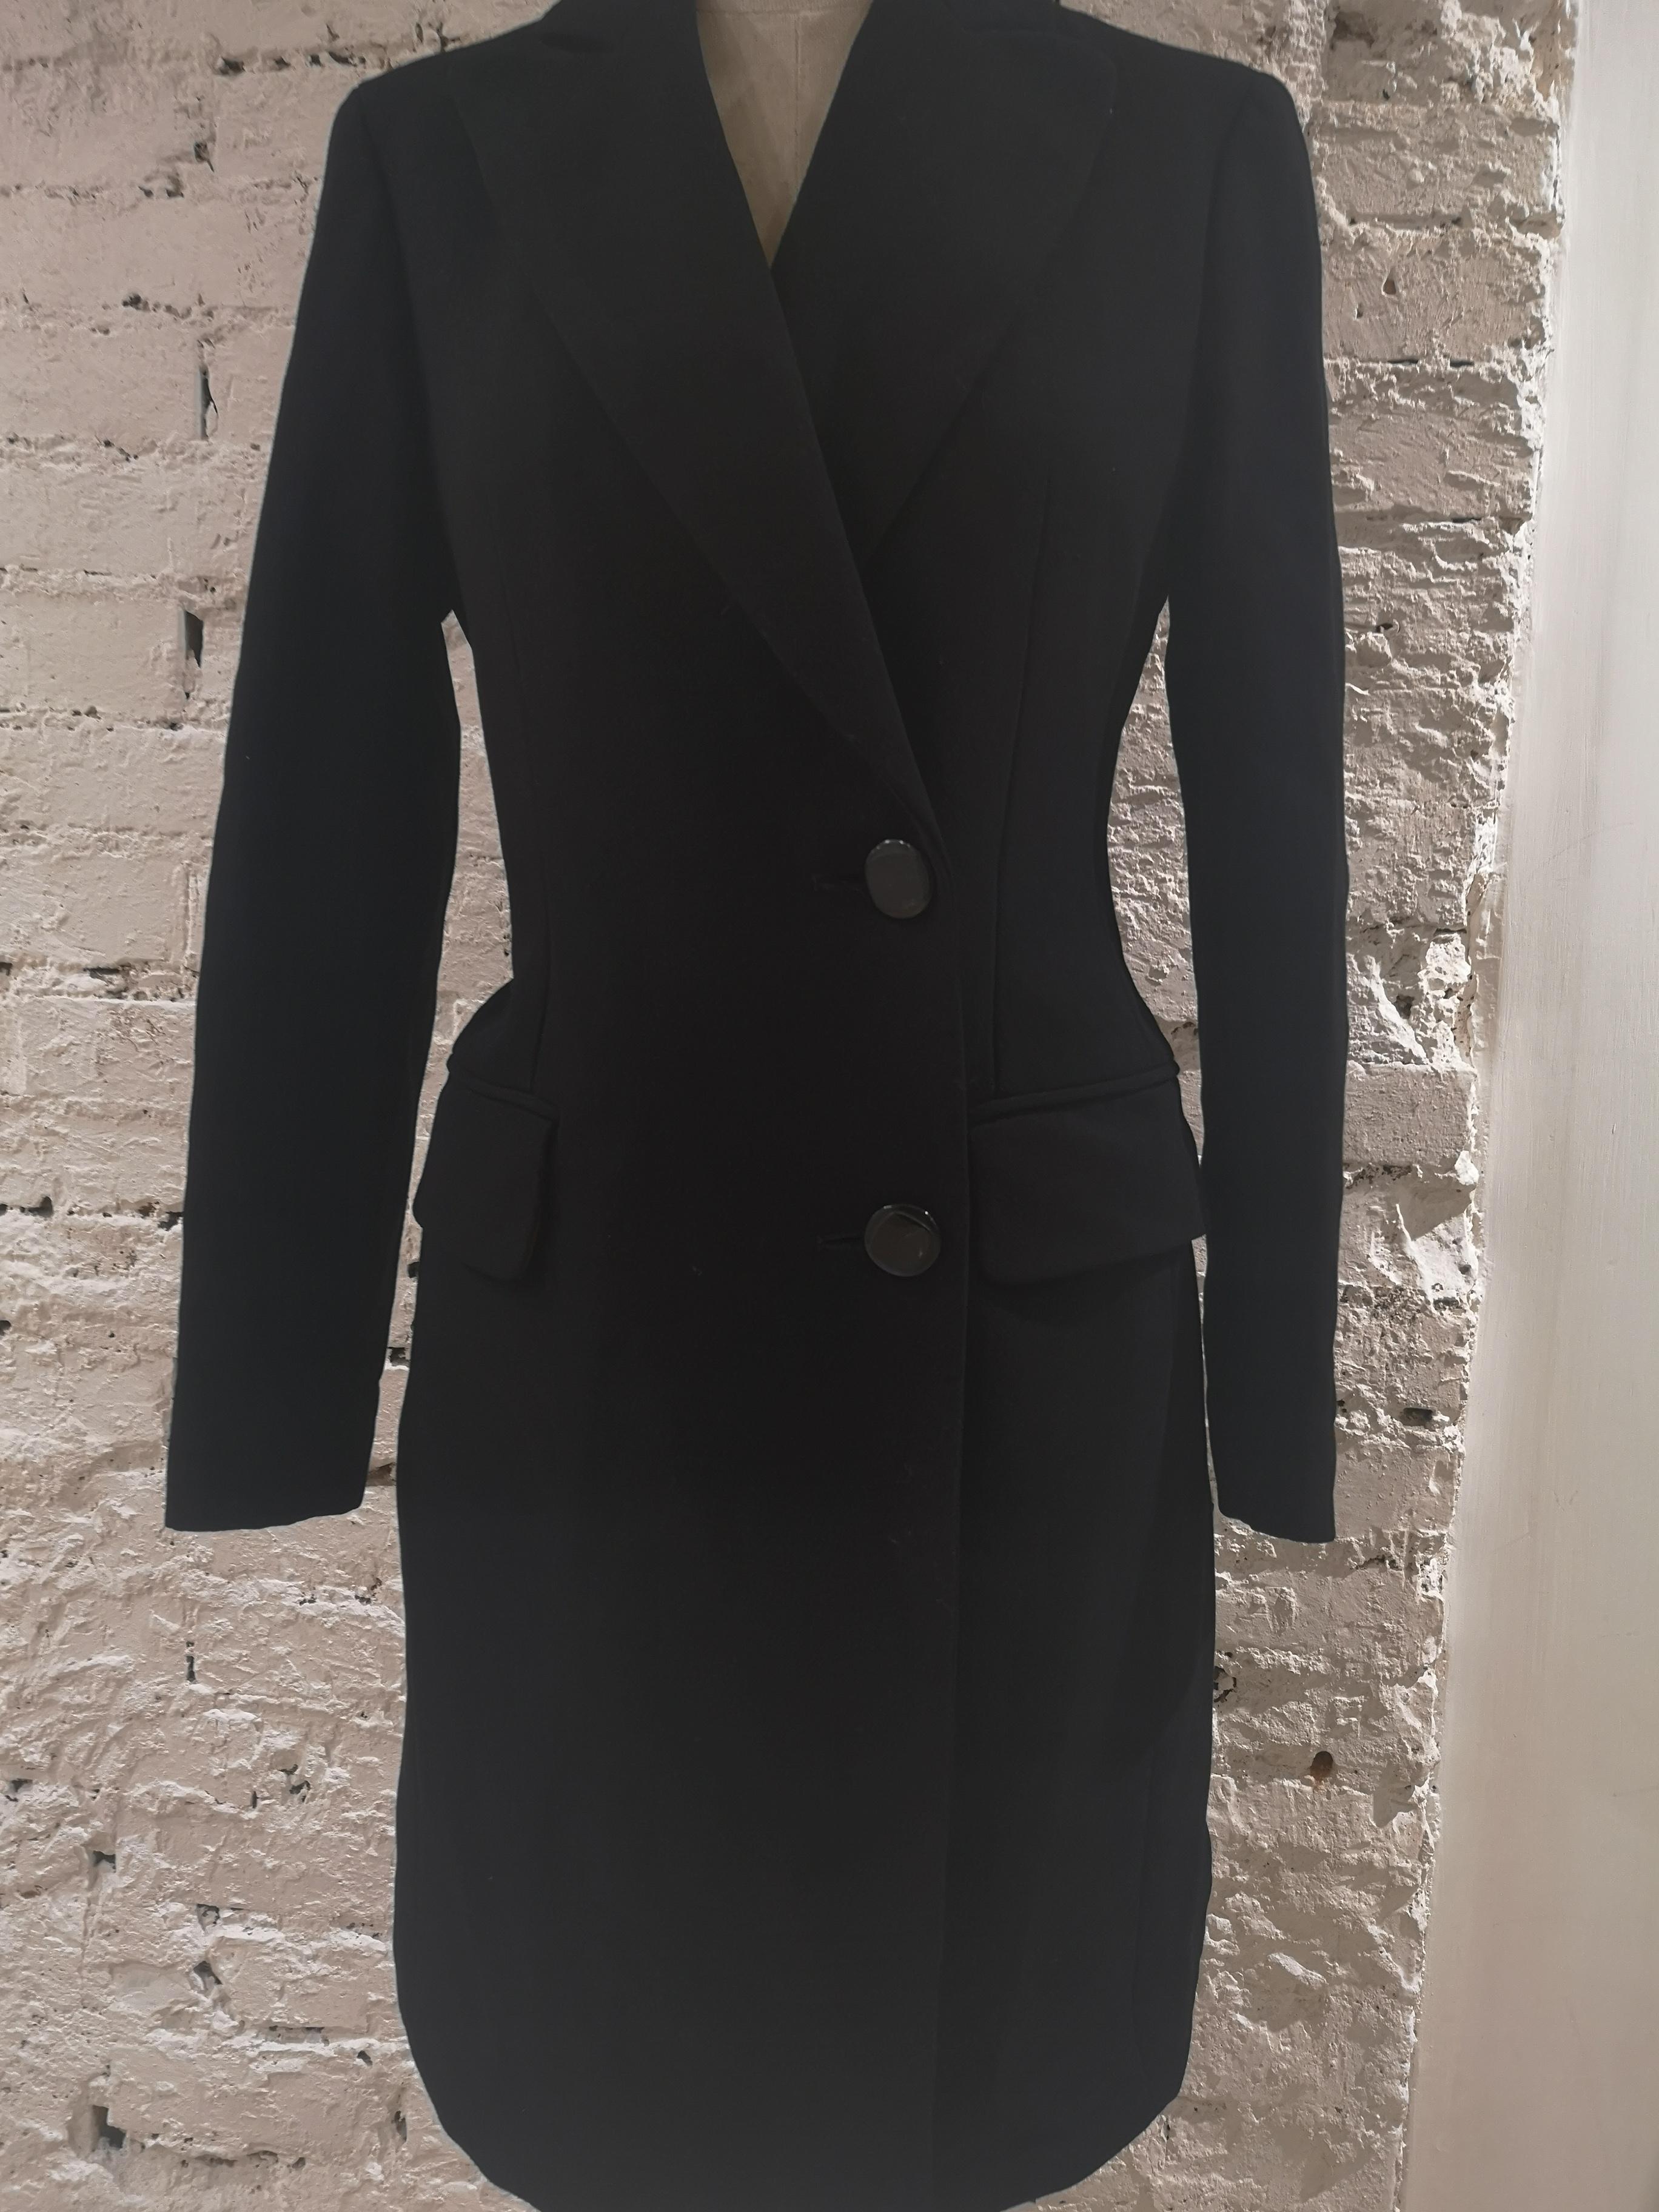 Moschino black wool long coat
totally made in italy in size 42